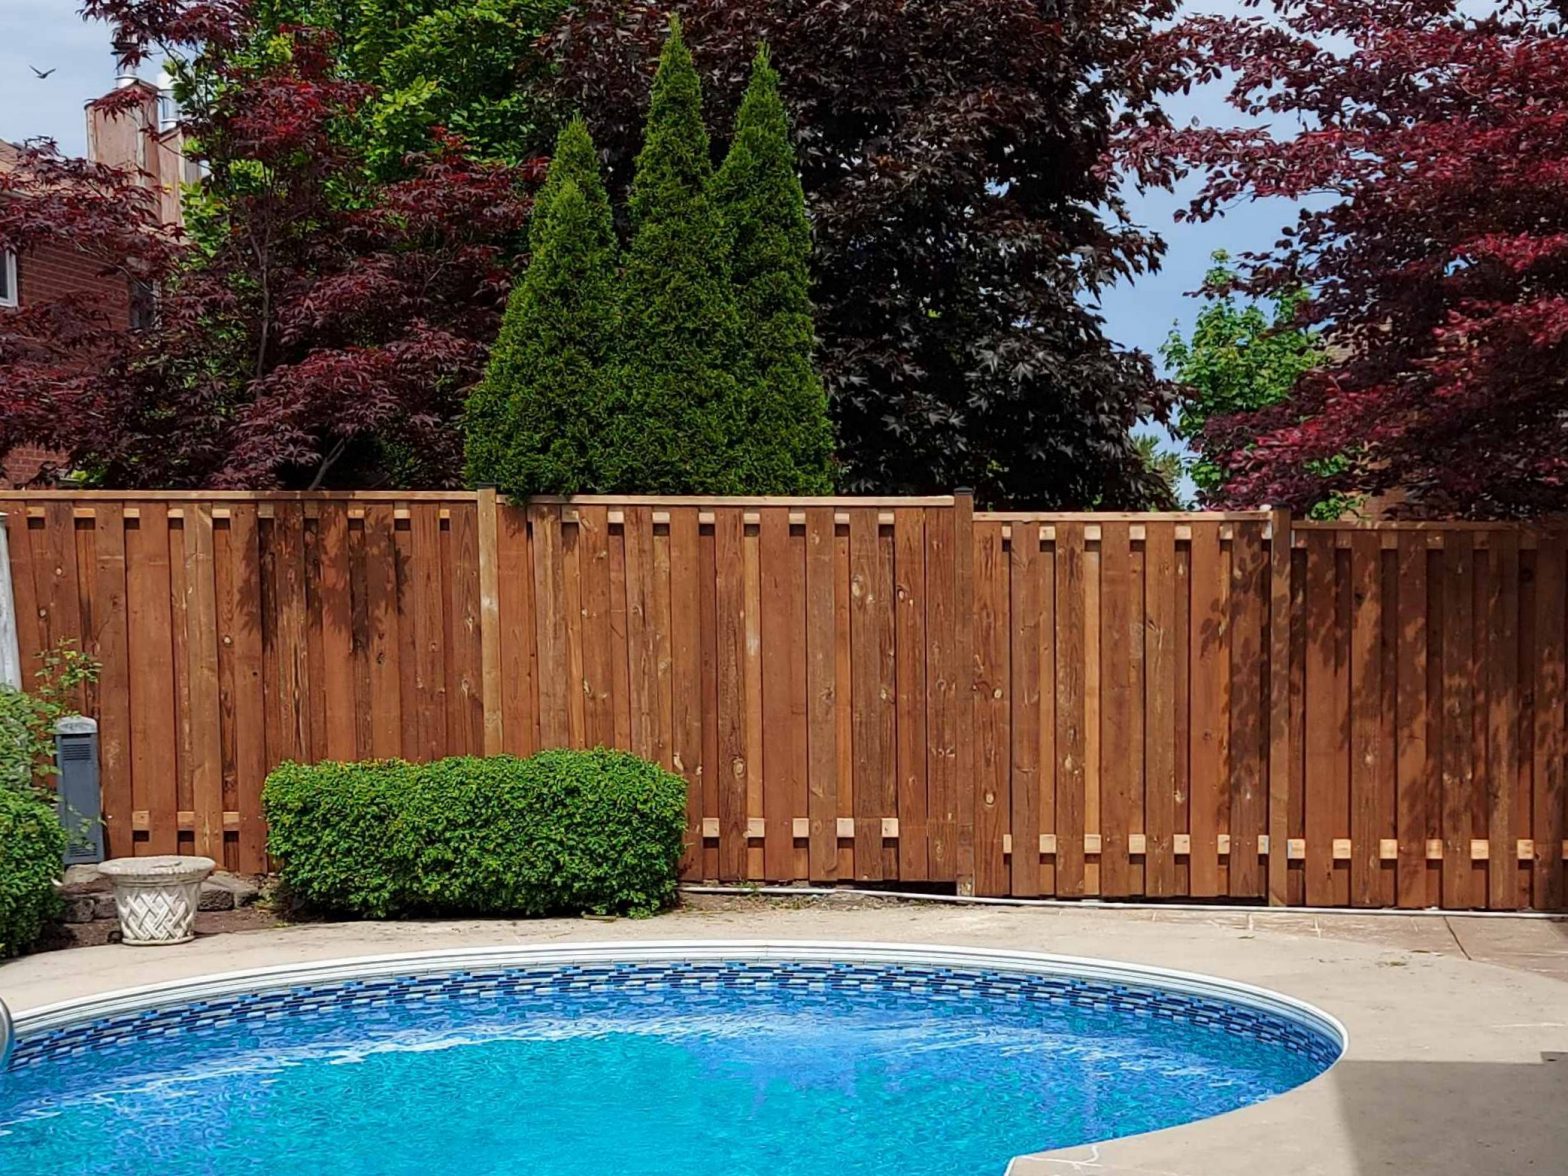 Photo of a privacy wood fence around a pool